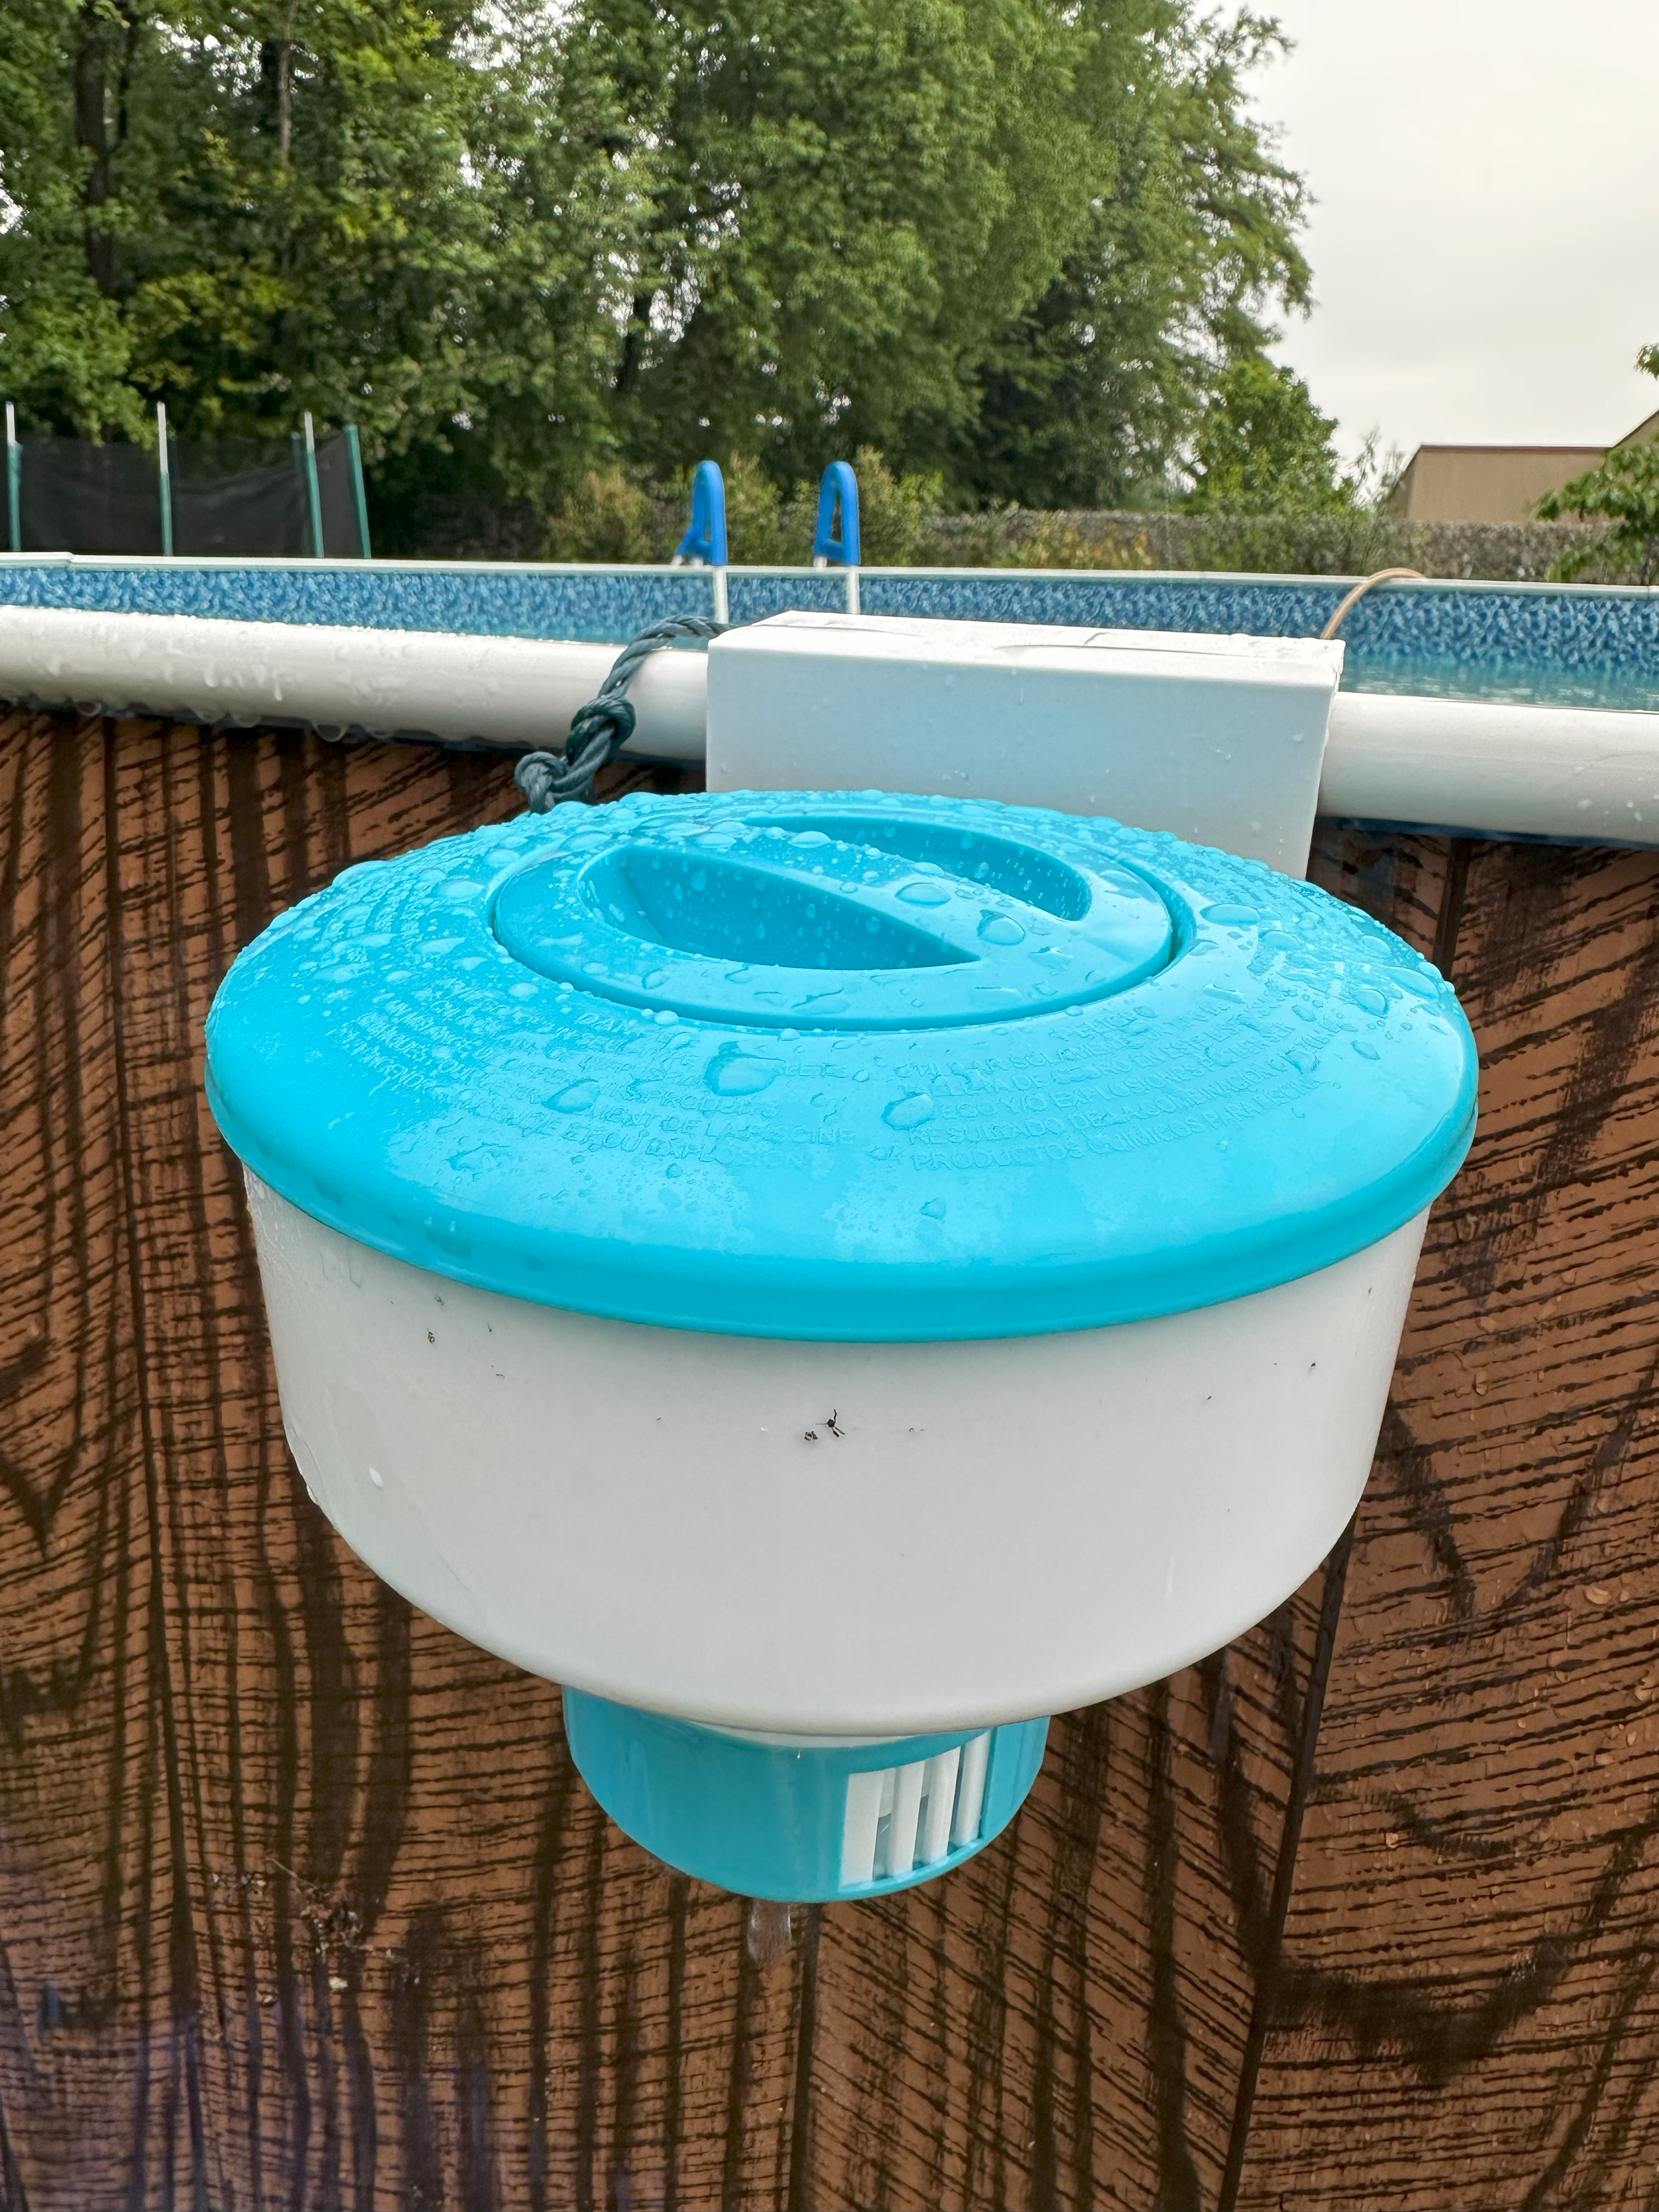 Swimming pool chlorine floater holder by Petr R